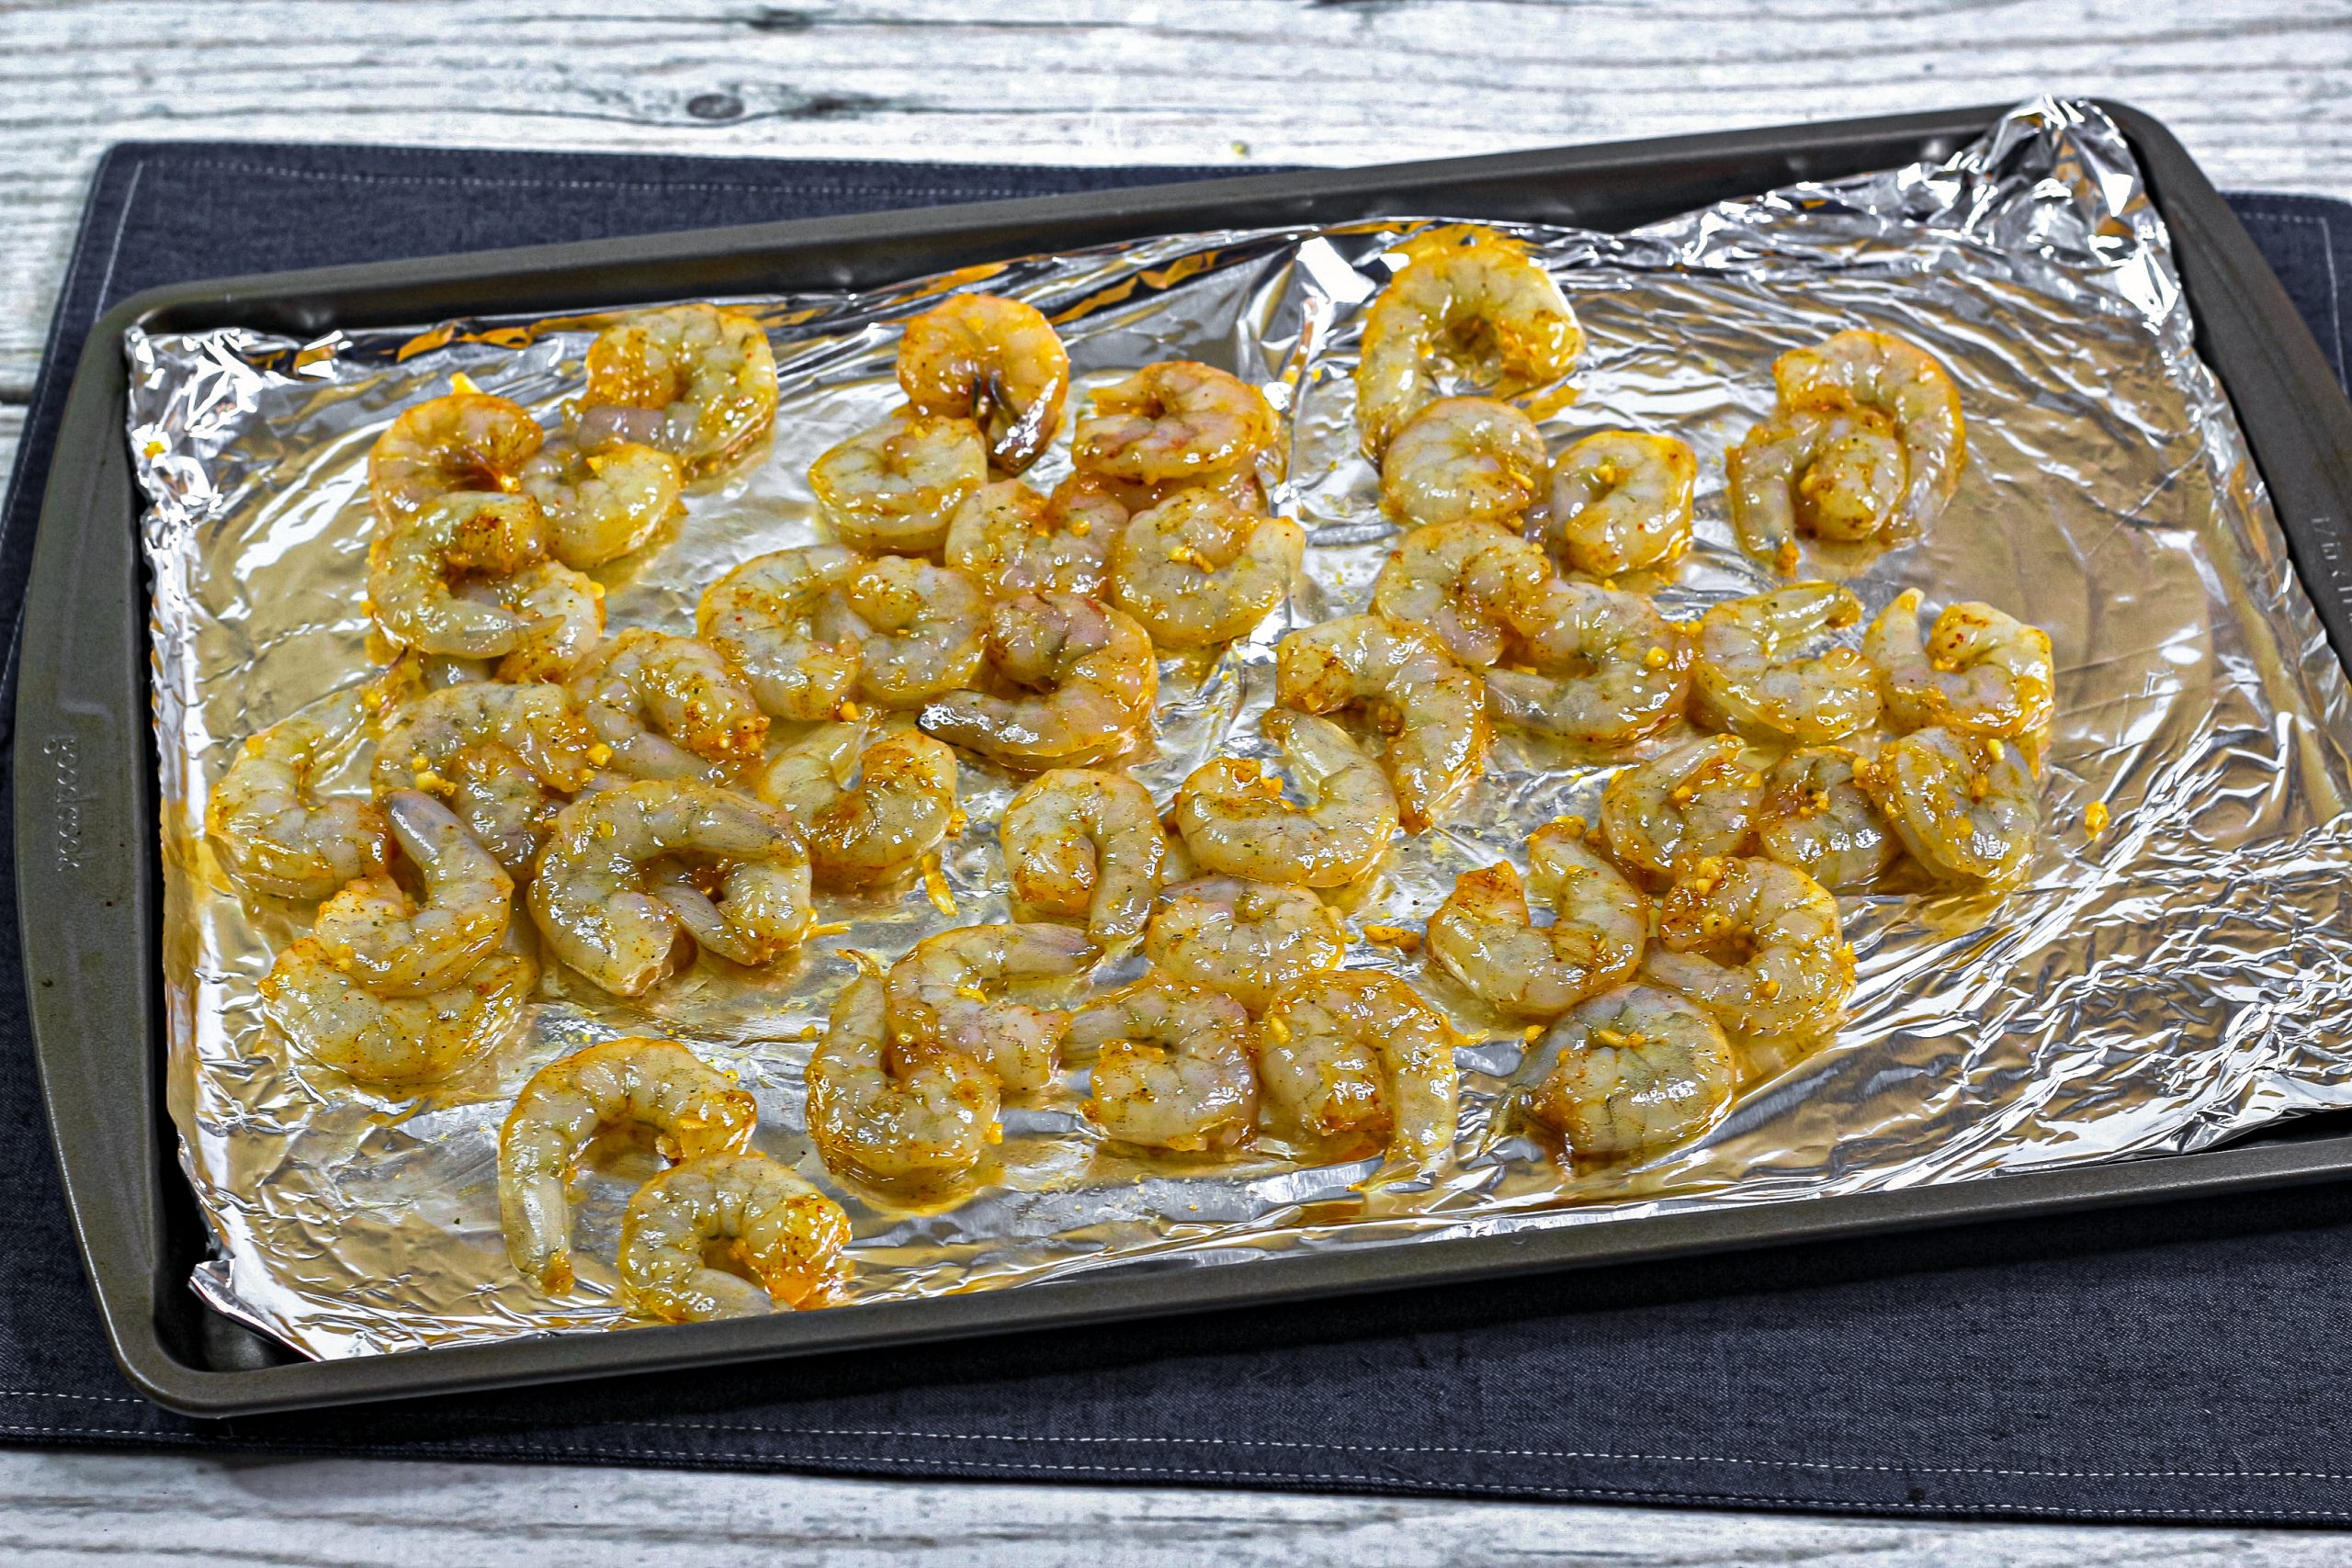 Line a baking tray with foil and evenly lay your shrimp on top.